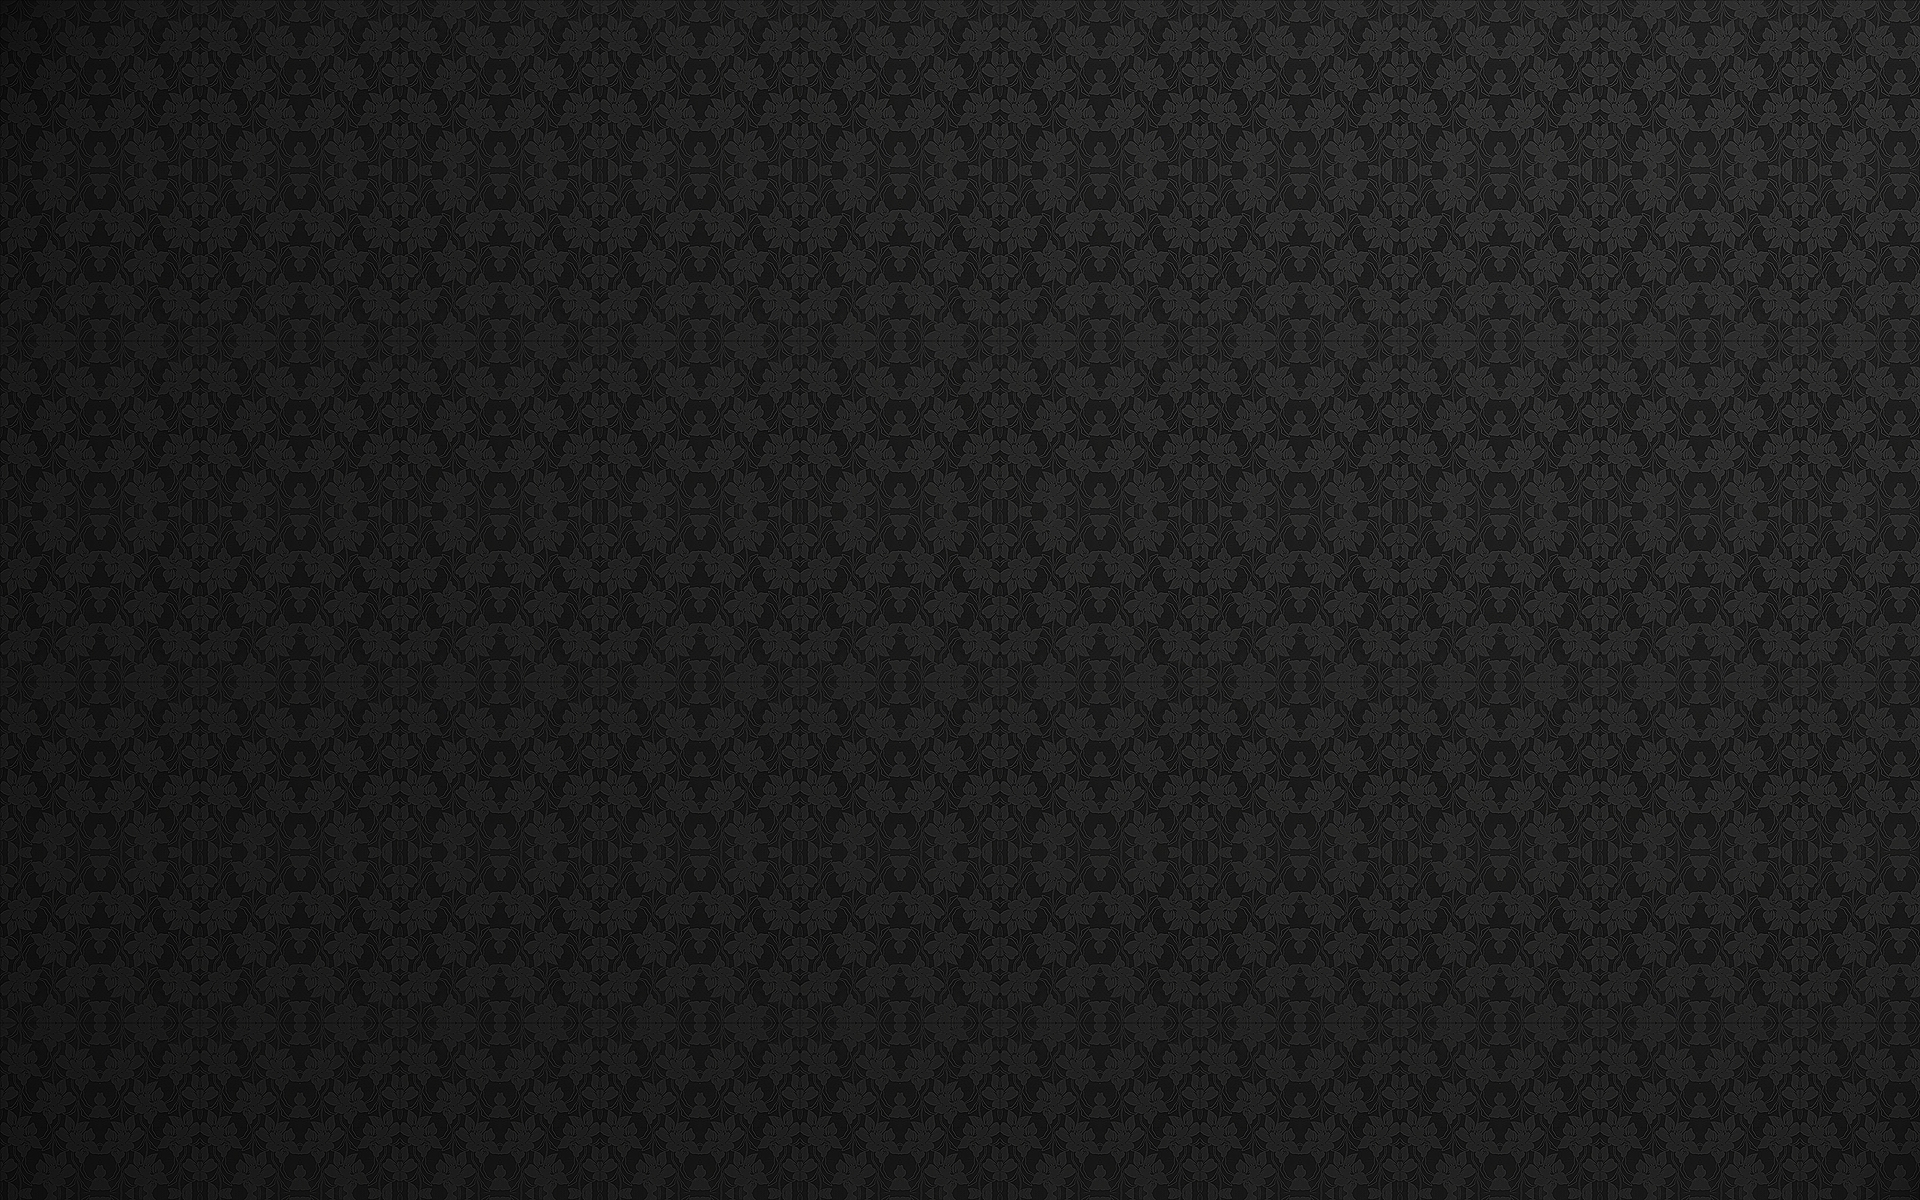 Stylish Black Background Material, Fashion, Black, Klax Background Image  And Wallpaper for Free Download